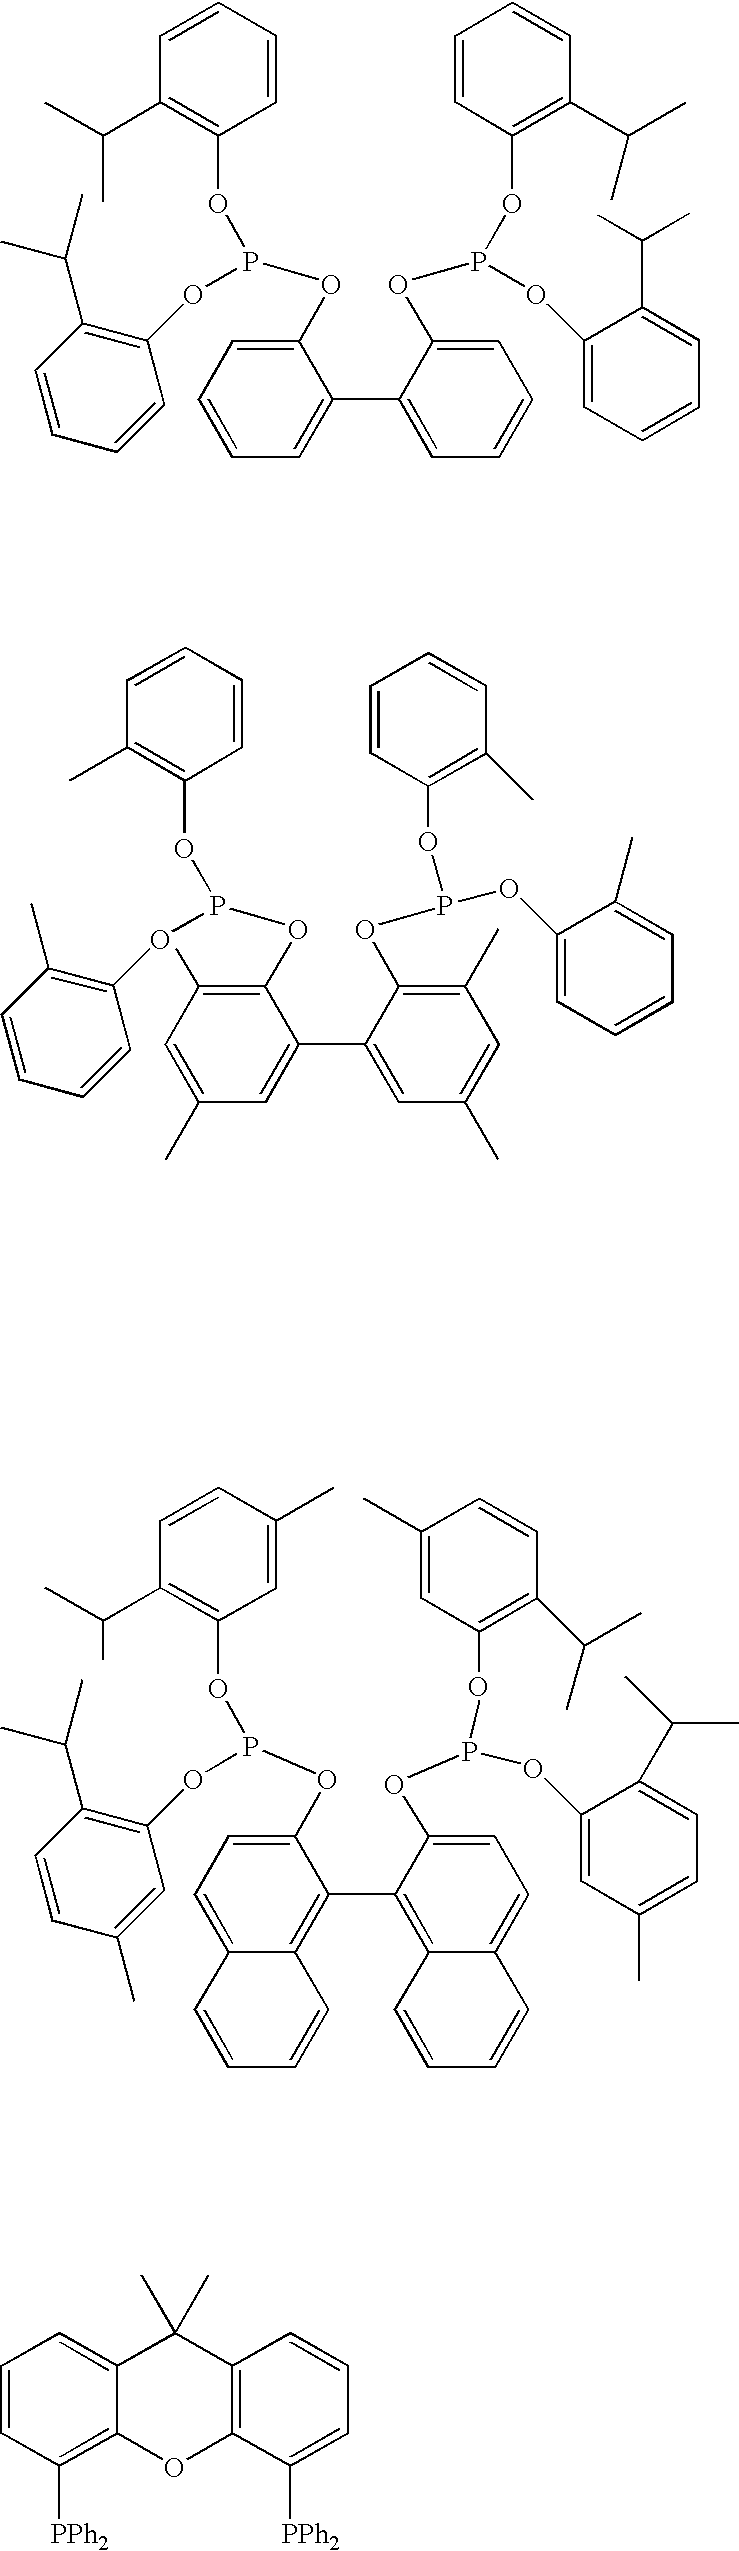 Process of synthesis of compounds having nitrile functions from ethylenically unsaturated compounds